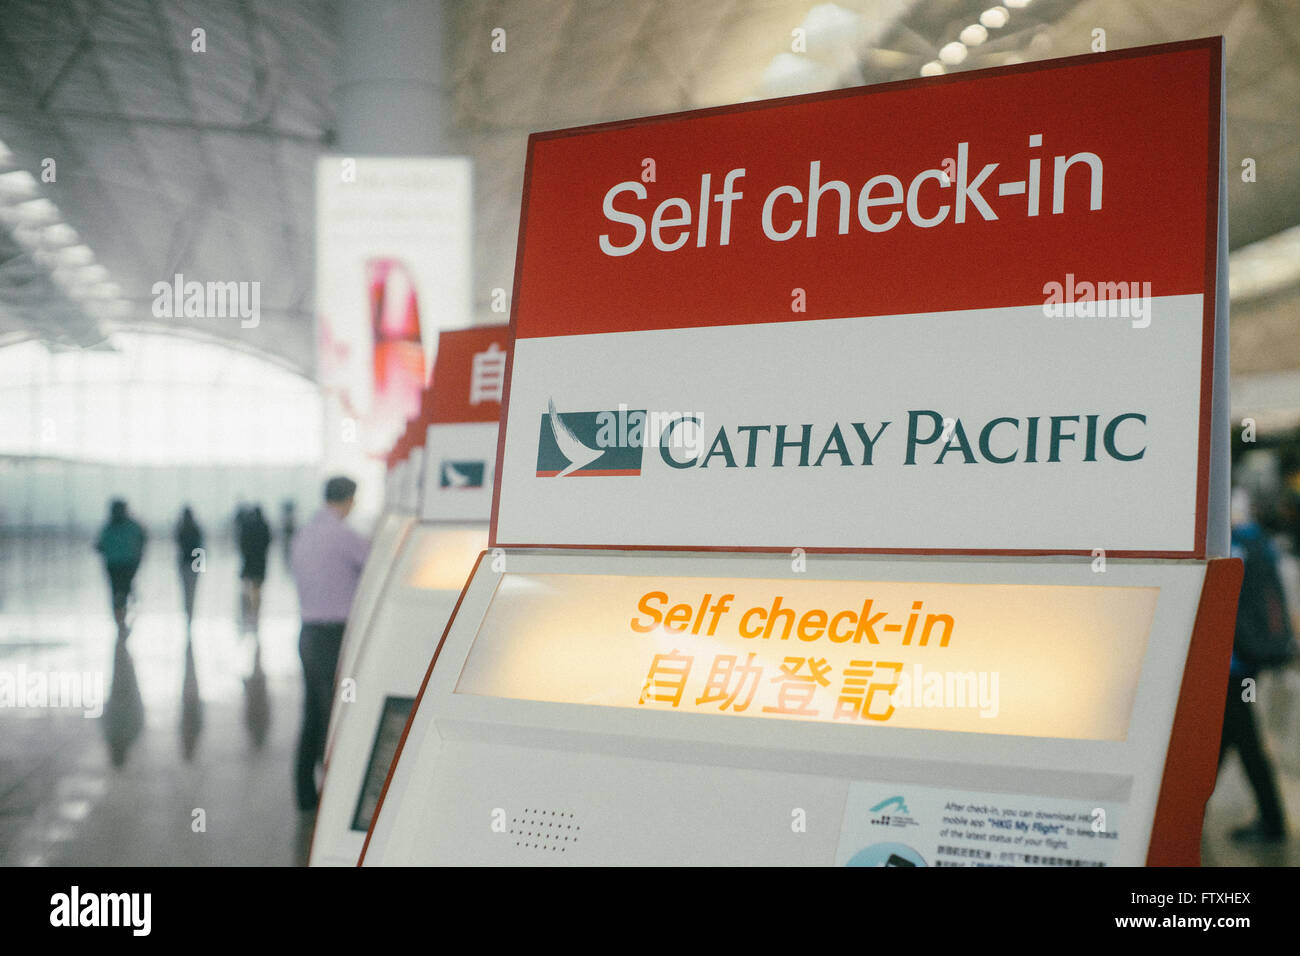 Cathay pacific self check in counter in hong kong airport. Stock Photo